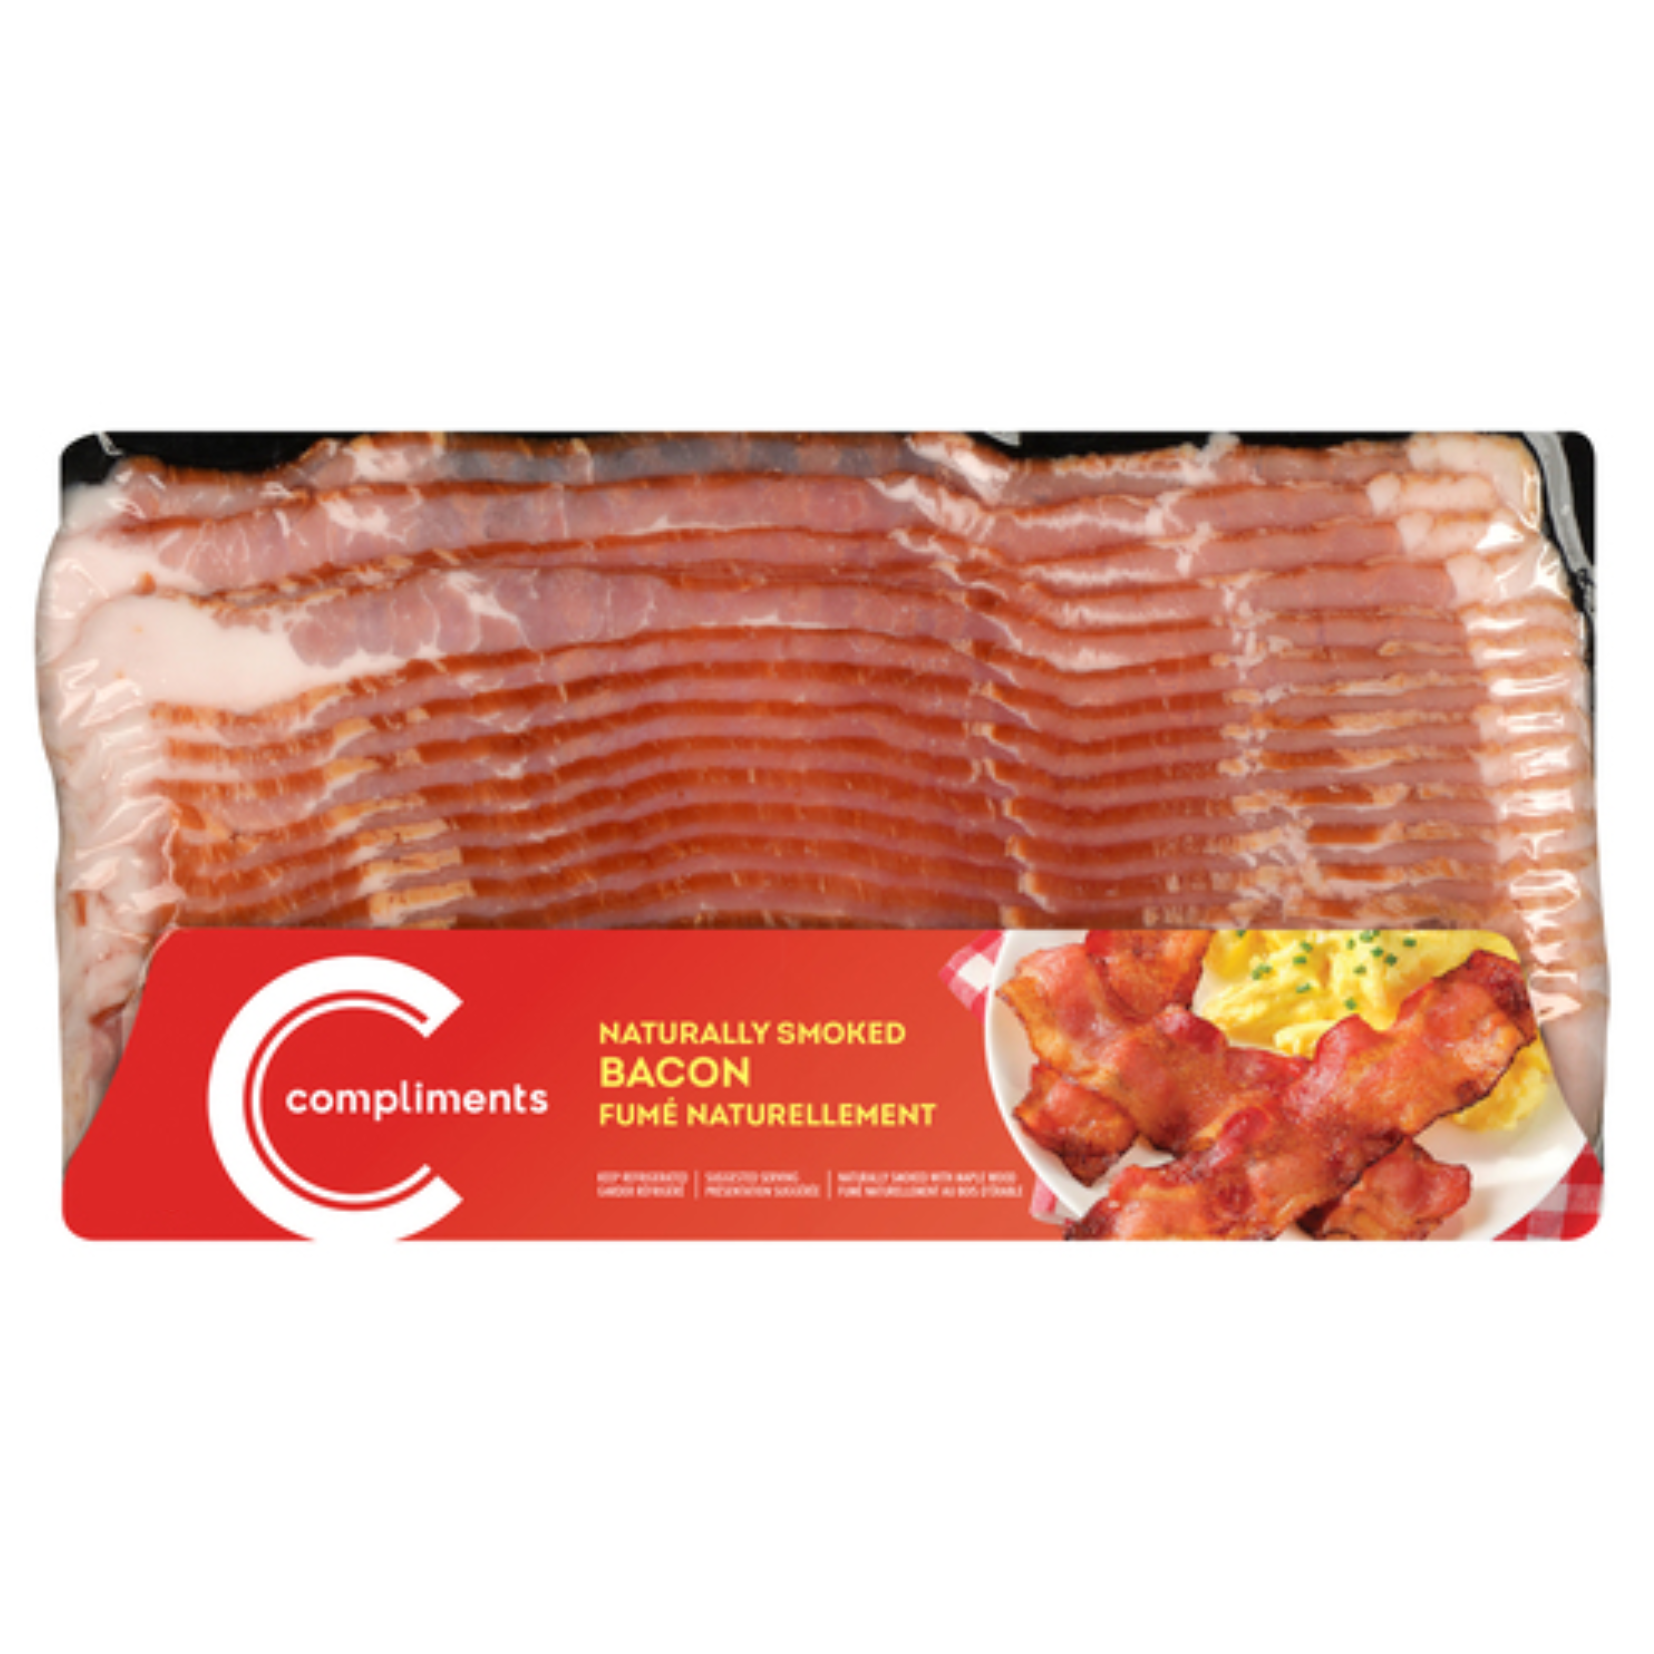 Compliments Naturally Smoked Bacon 375g